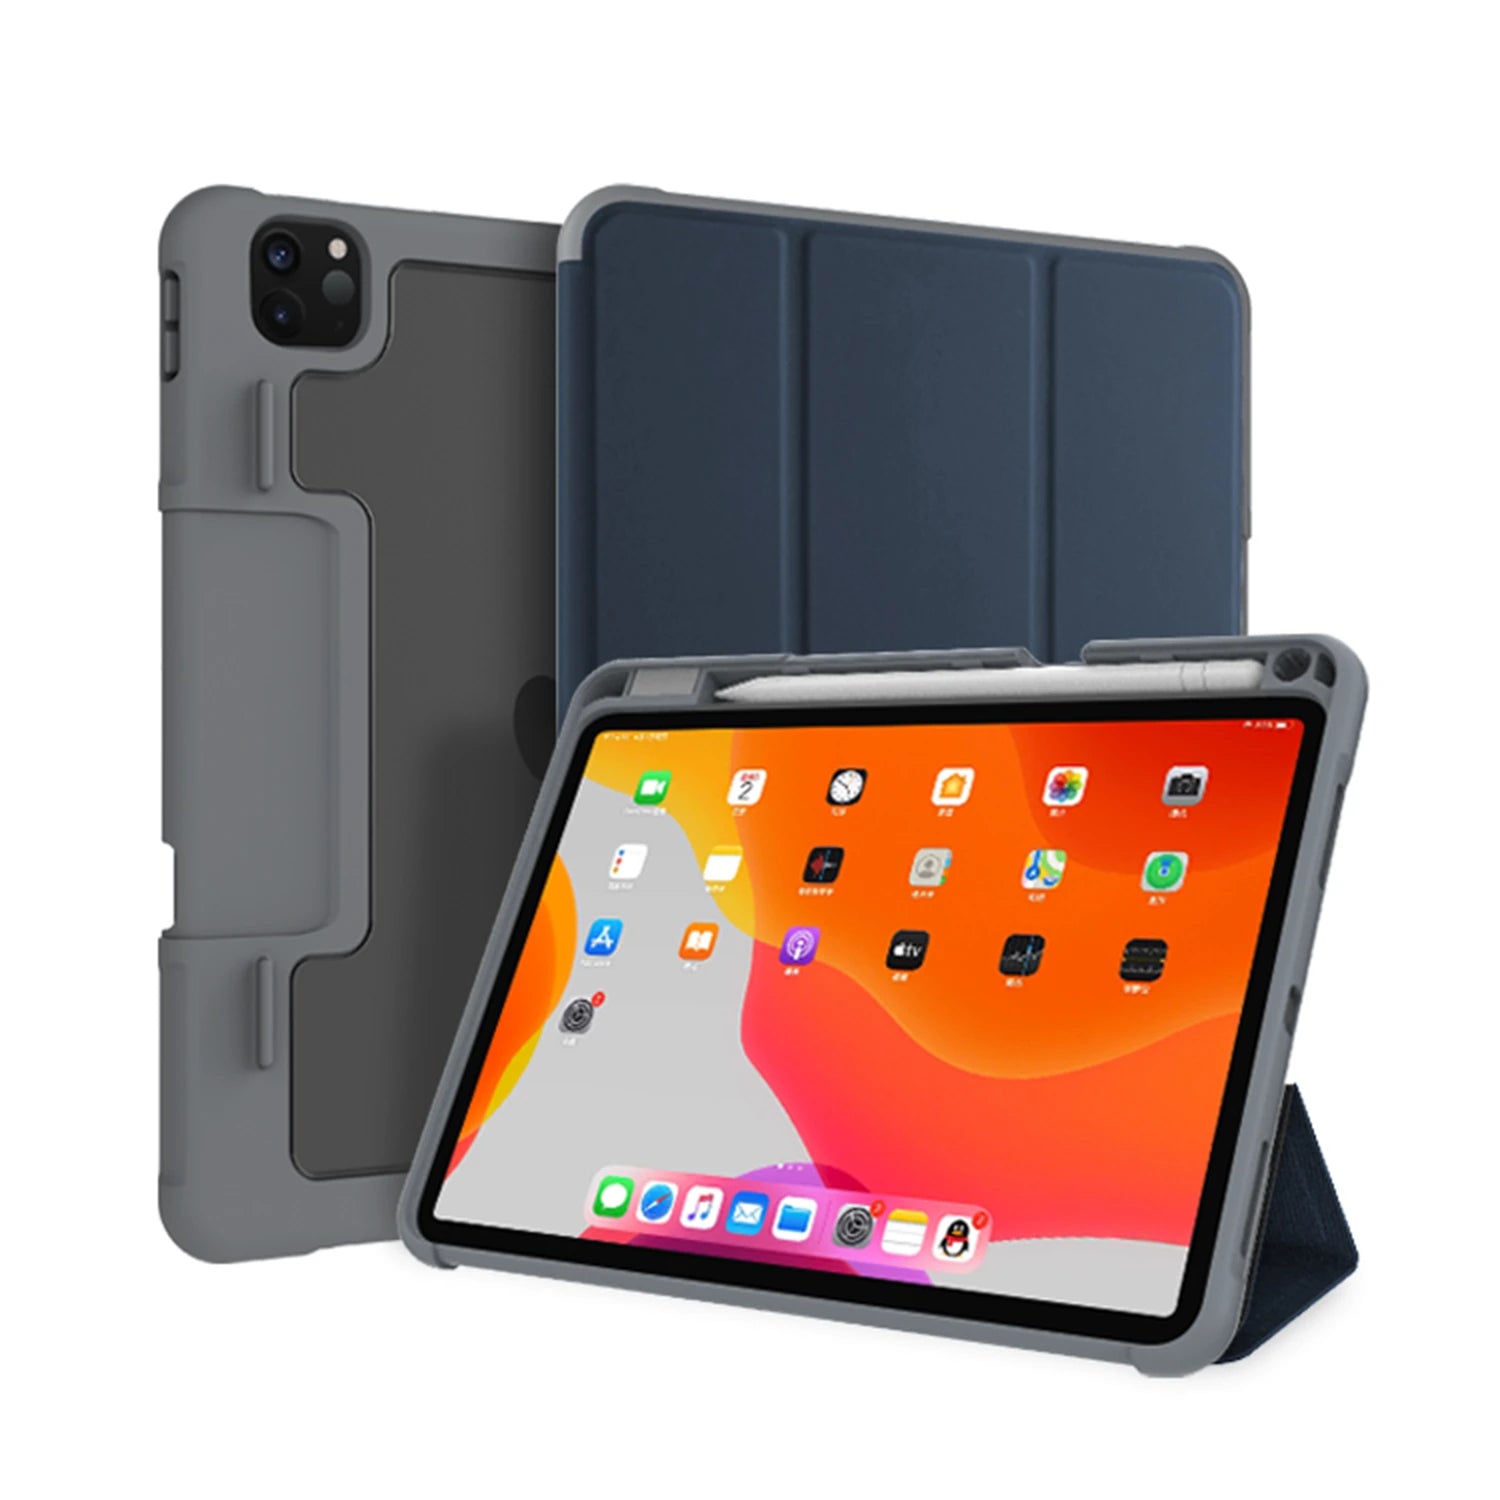 Mutural Yaxing Series Rugged Folio Case with Pencil Holder for iPad 9.7"/ 9th Gen 10.2"/ Pro 10.5"/ Pro 11"/ 10th Gen 10.9"/ Air 10.9"/ Pro 12.9"/ iPad Mini 6